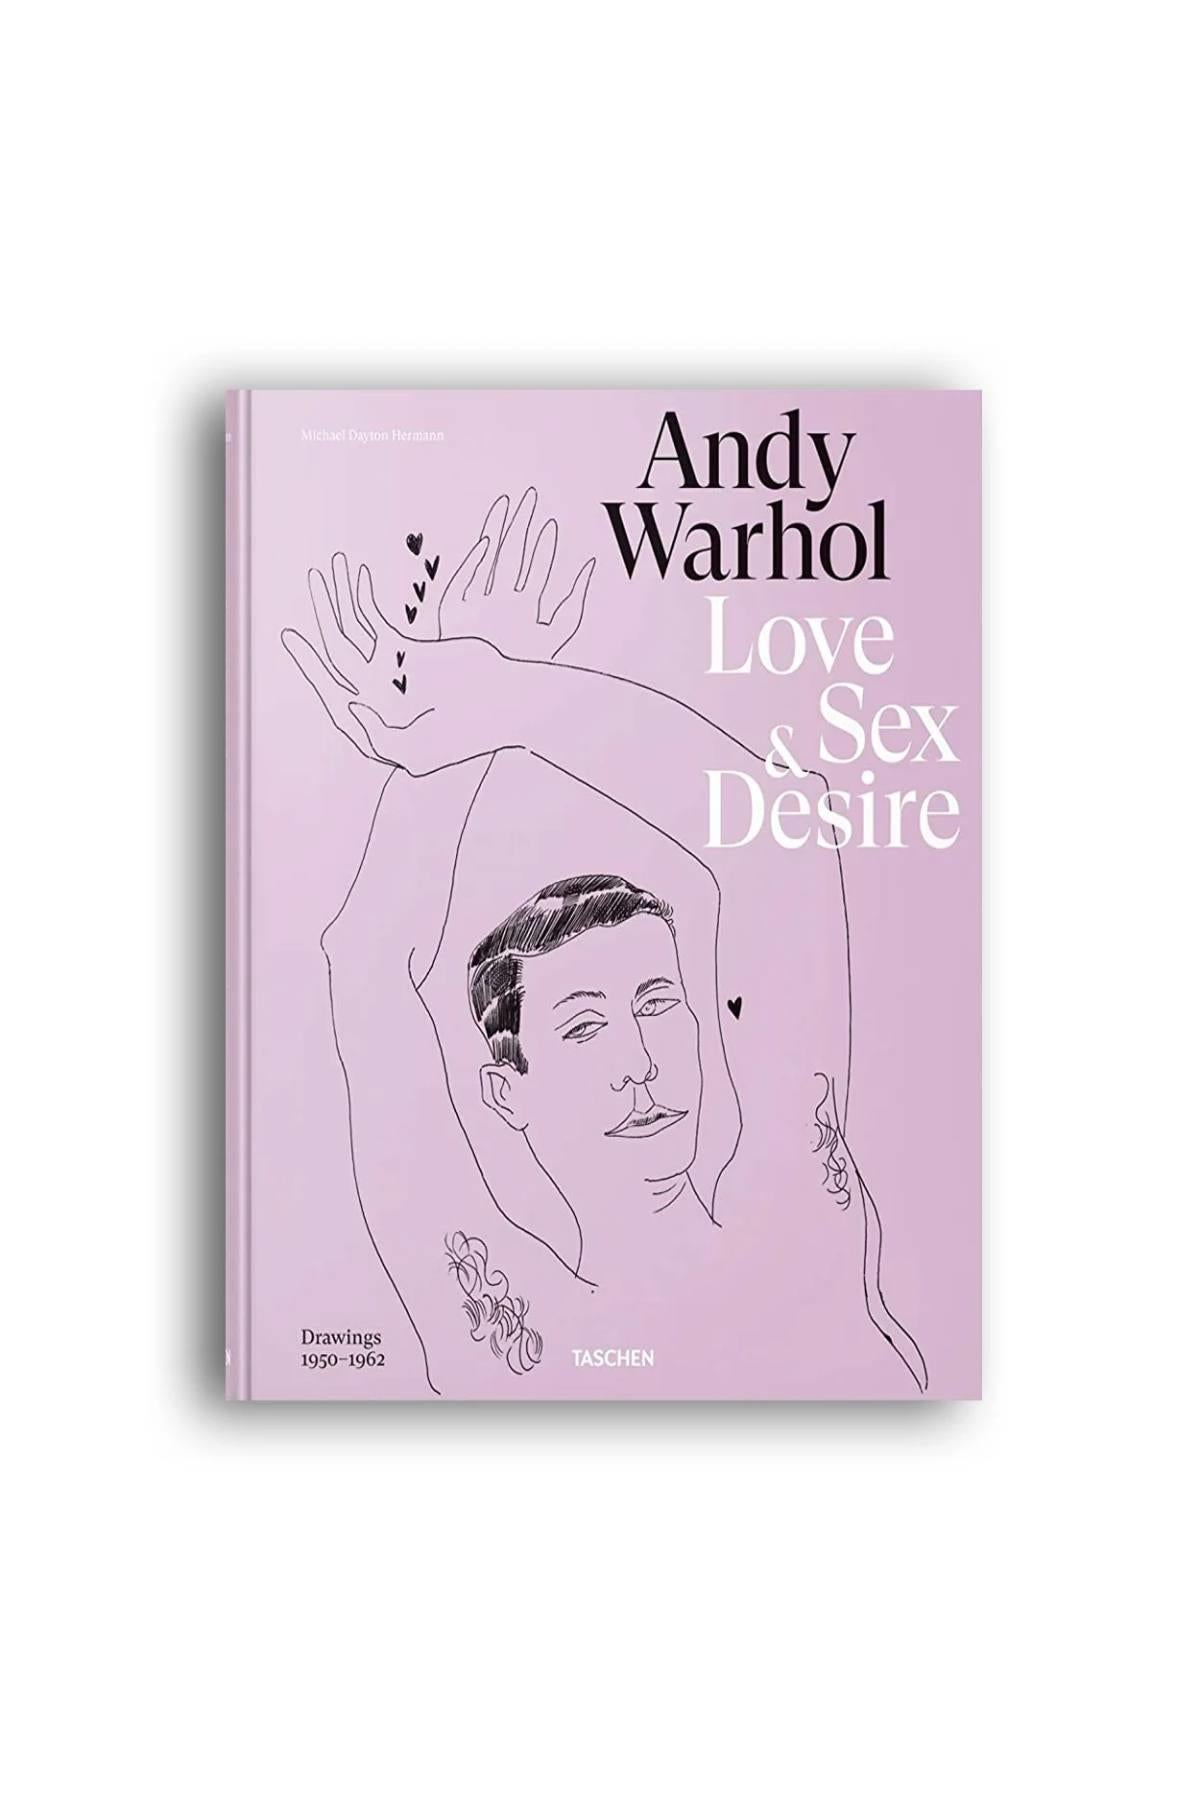 Andy Warhol - Love, Sex and Desire: Drawings 1950-1962 Book